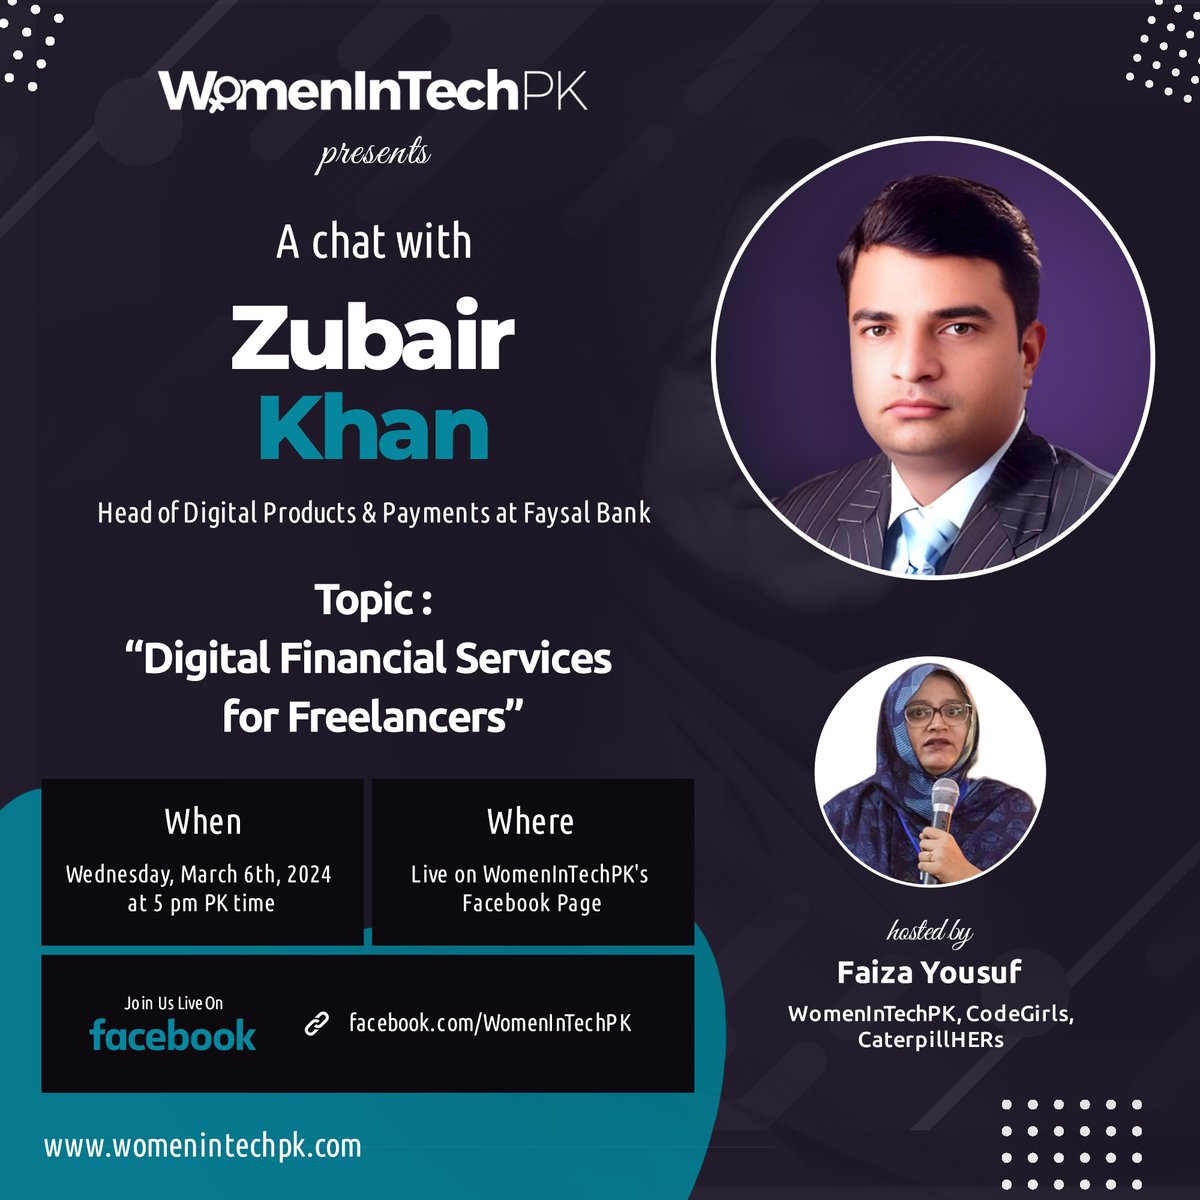 Join our conversation with Zubair Khan from Faysal Bank on Digital Financial Services for Freelancers. We will talk about their newest offering that helps freelancers get a USD account and Zubair’s take on bringing better services to the ecosystem. #WomenInTechPK